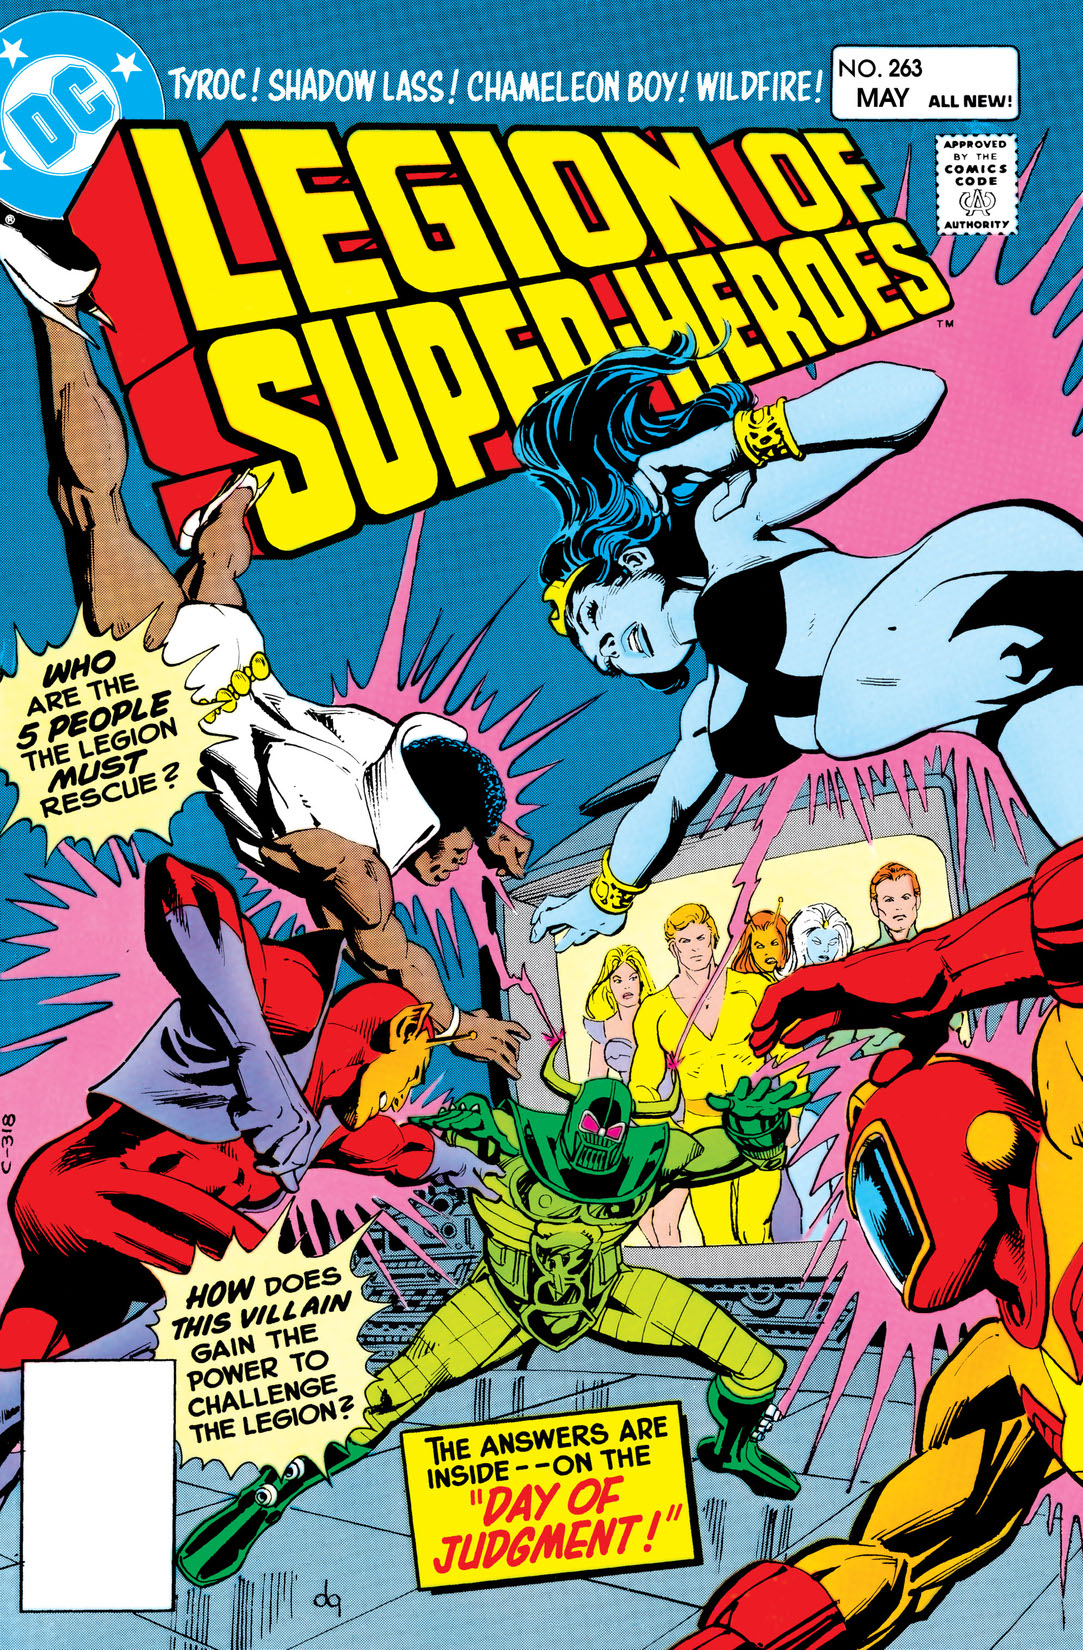 The Legion of Super-Heroes (1980-) #263 preview images